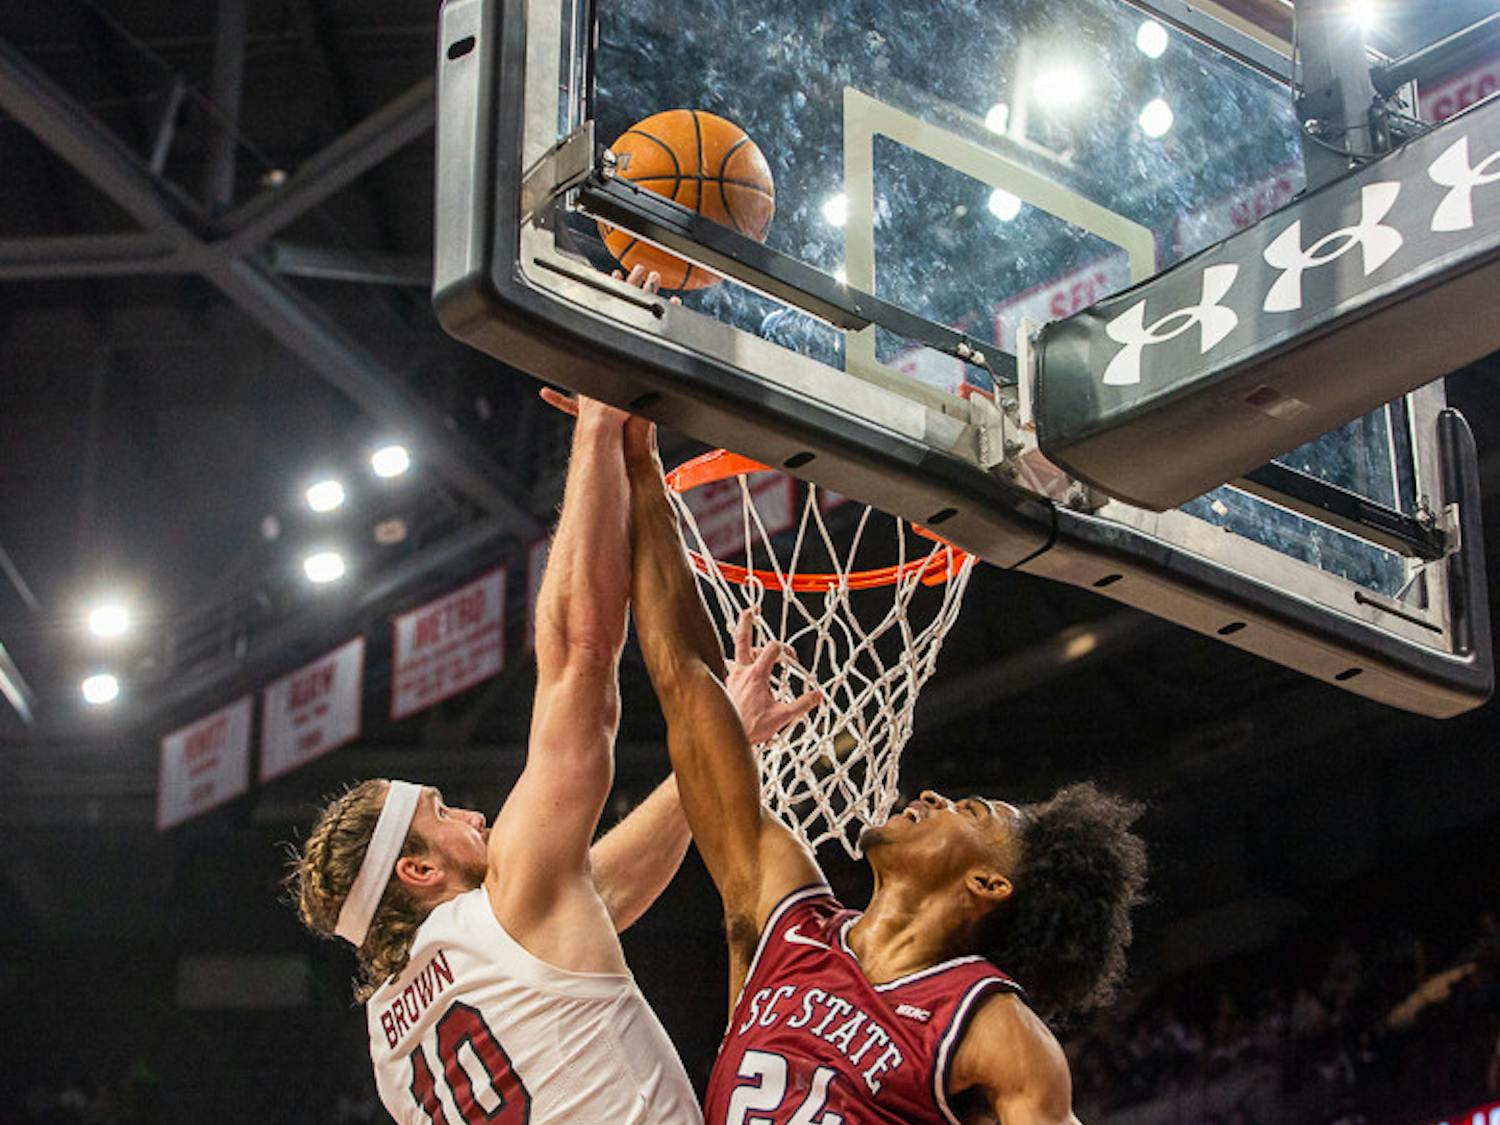 The South Carolina men's basketball team started out their season with a 80-77 win against the South Carolina State Bulldogs on Nov. 8, 2022. The win is Lamont Paris' first as the head coach of the Gamecocks. Graduate student Hayden Brown and freshman forward GG Jackson helped catapult South Carolina to the season opening win. &nbsp;

Photos by: Sam Schorr